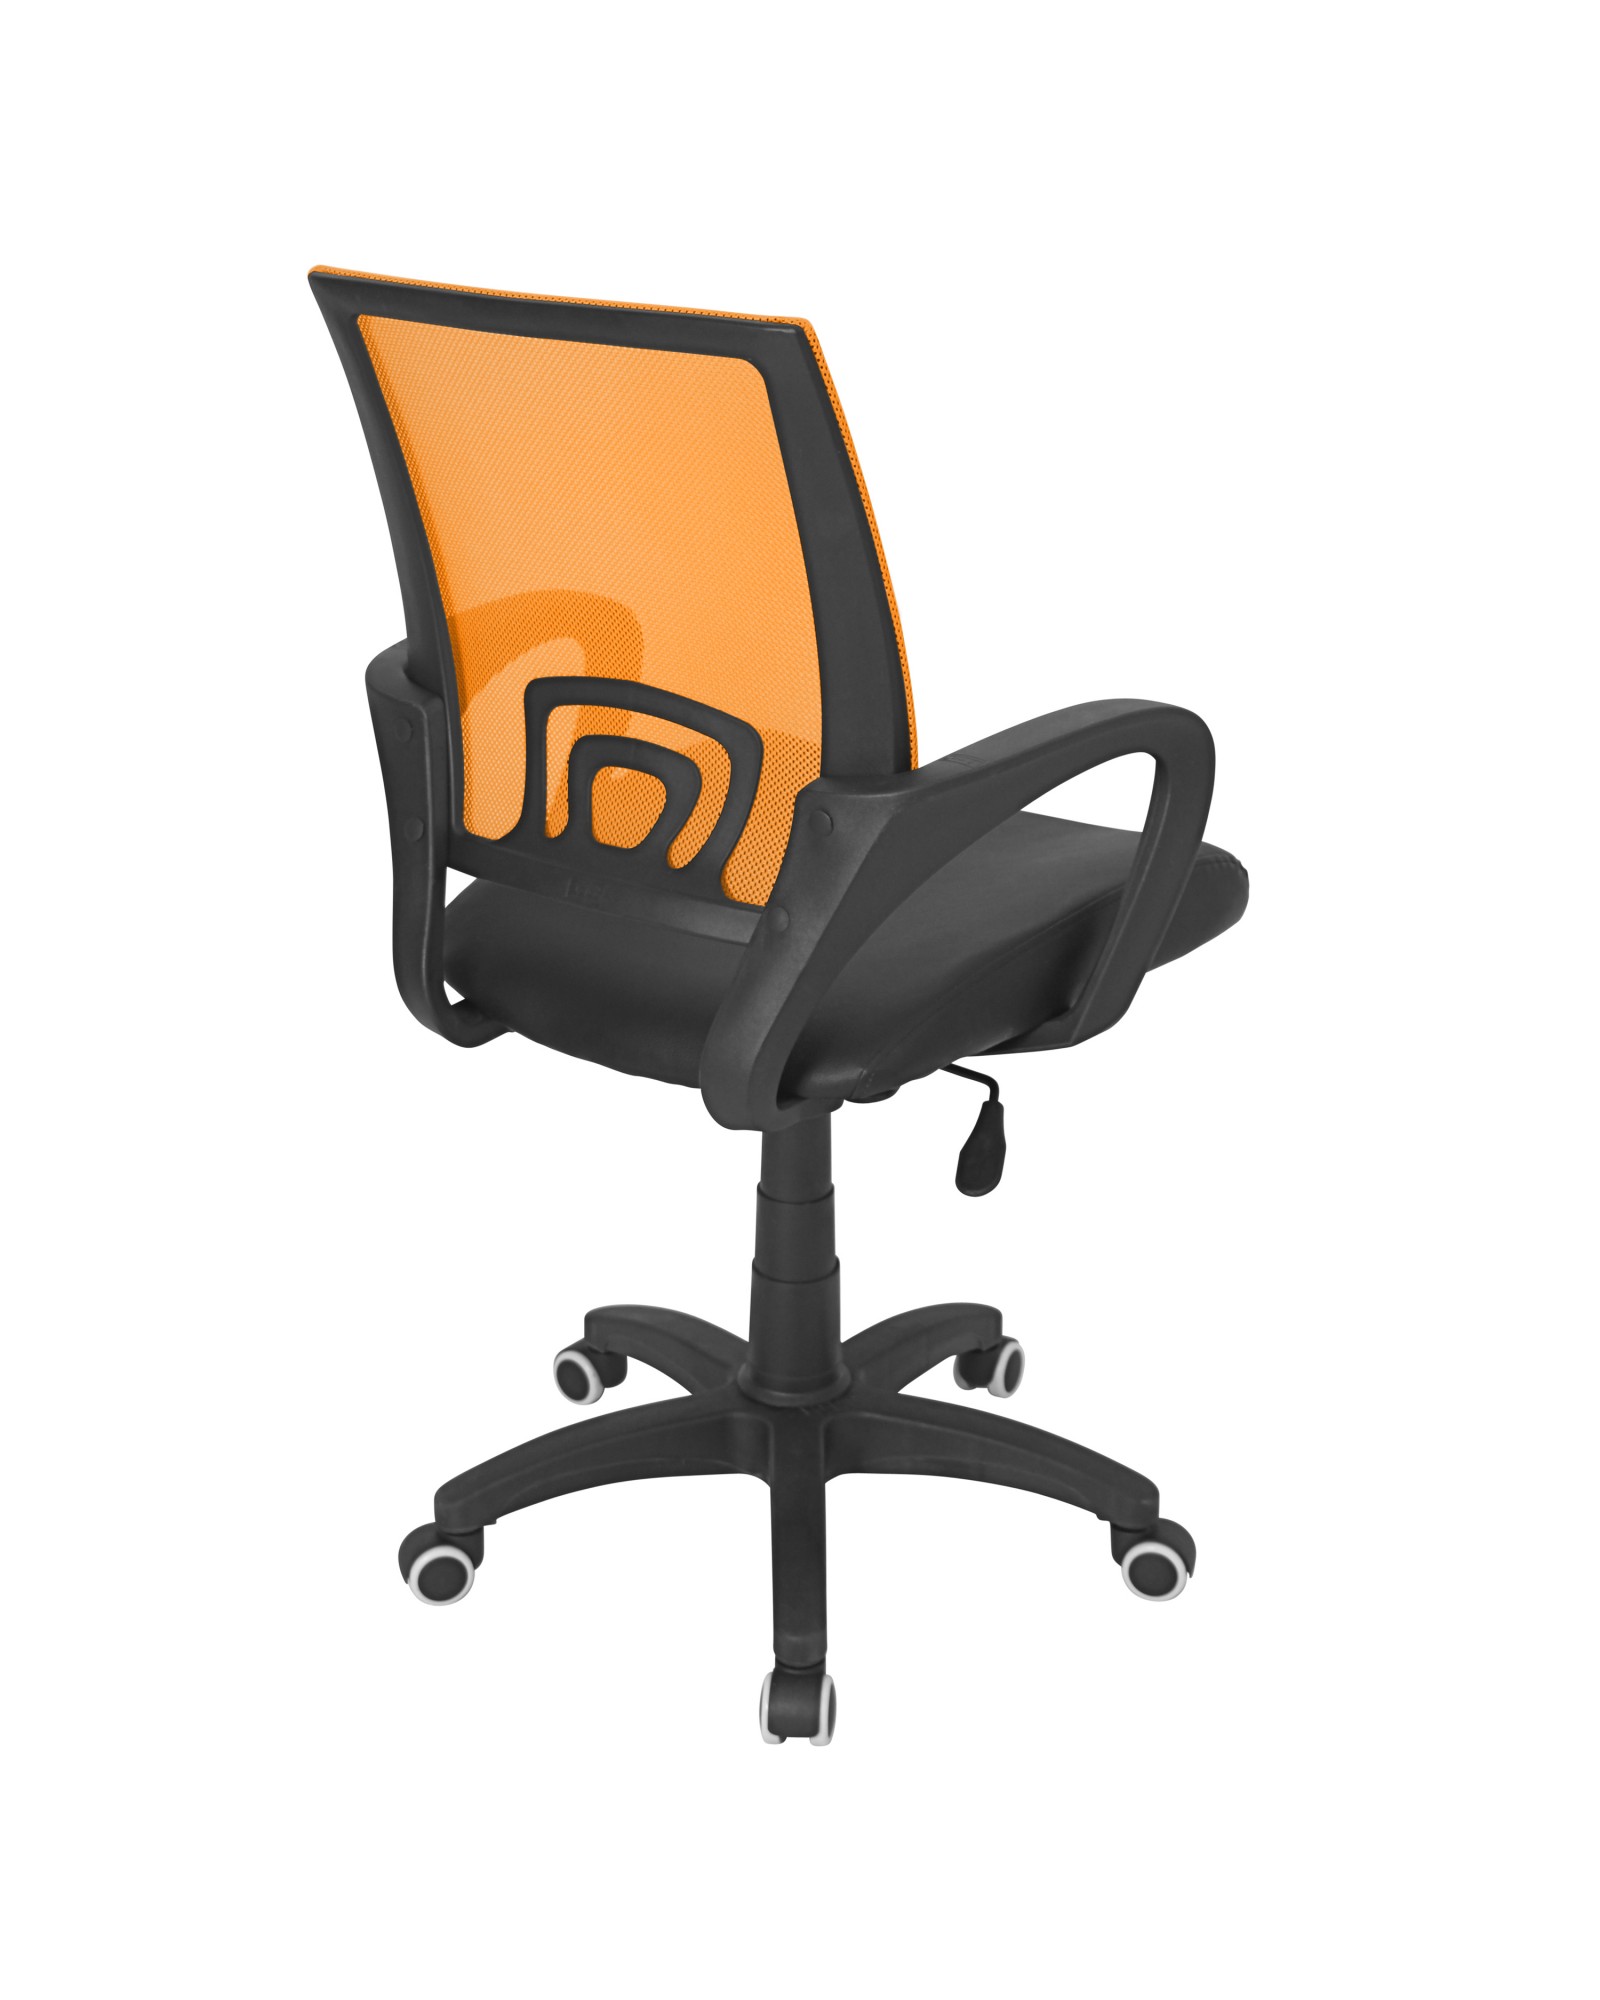 Officer Modern Adjustable Office Chair with Swivel in Orange